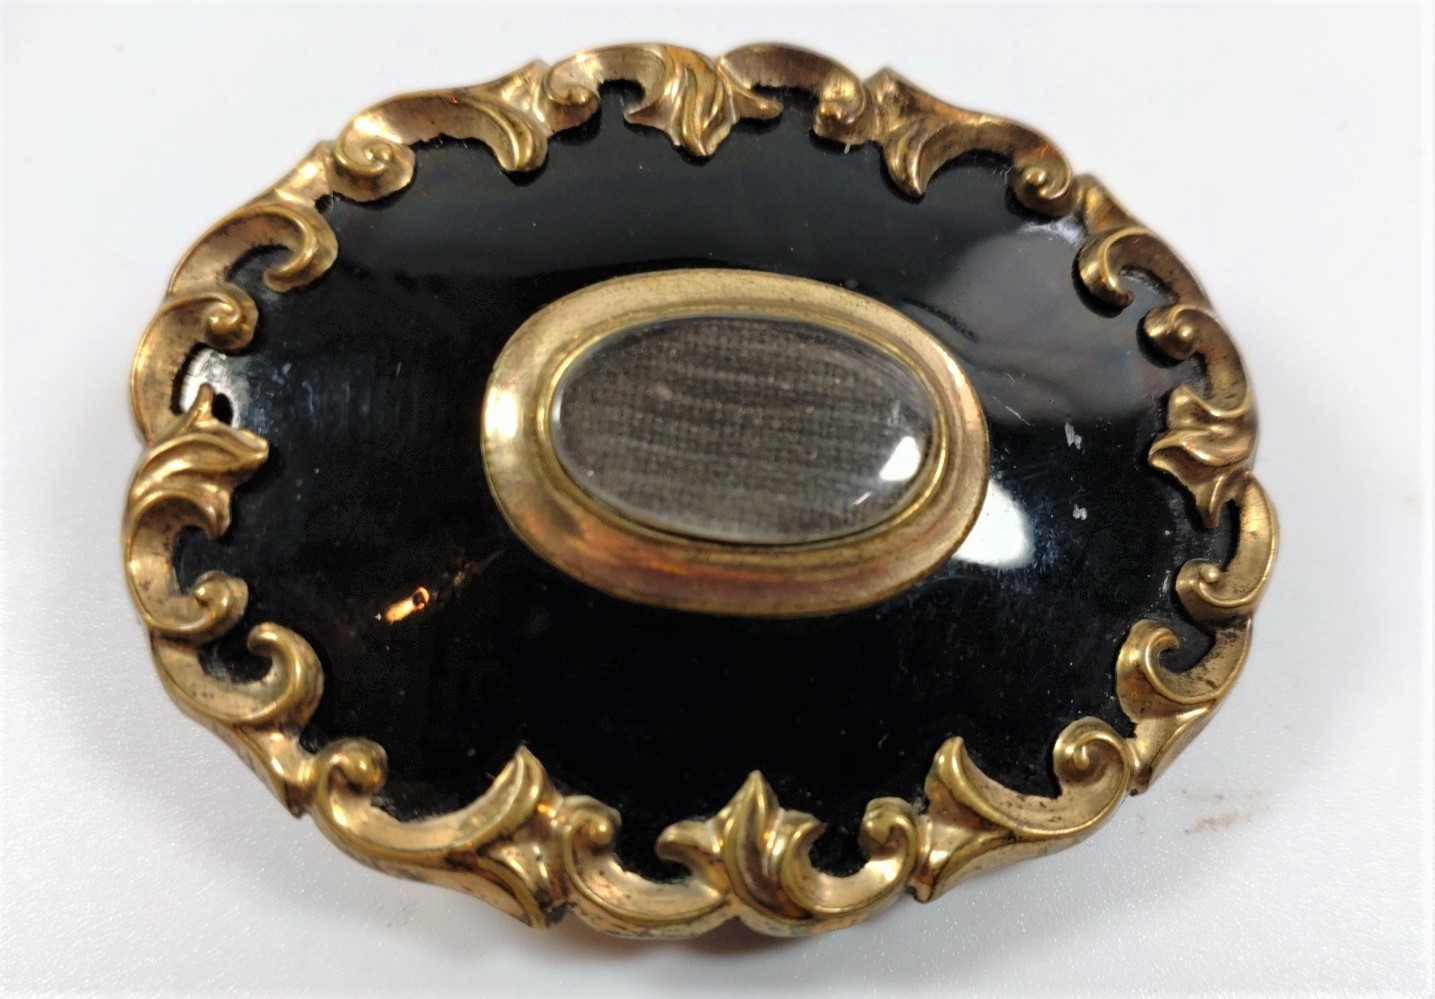 A Victorian Memorial brooch in black enamel and gold colour metal, with a framed lock of hair to